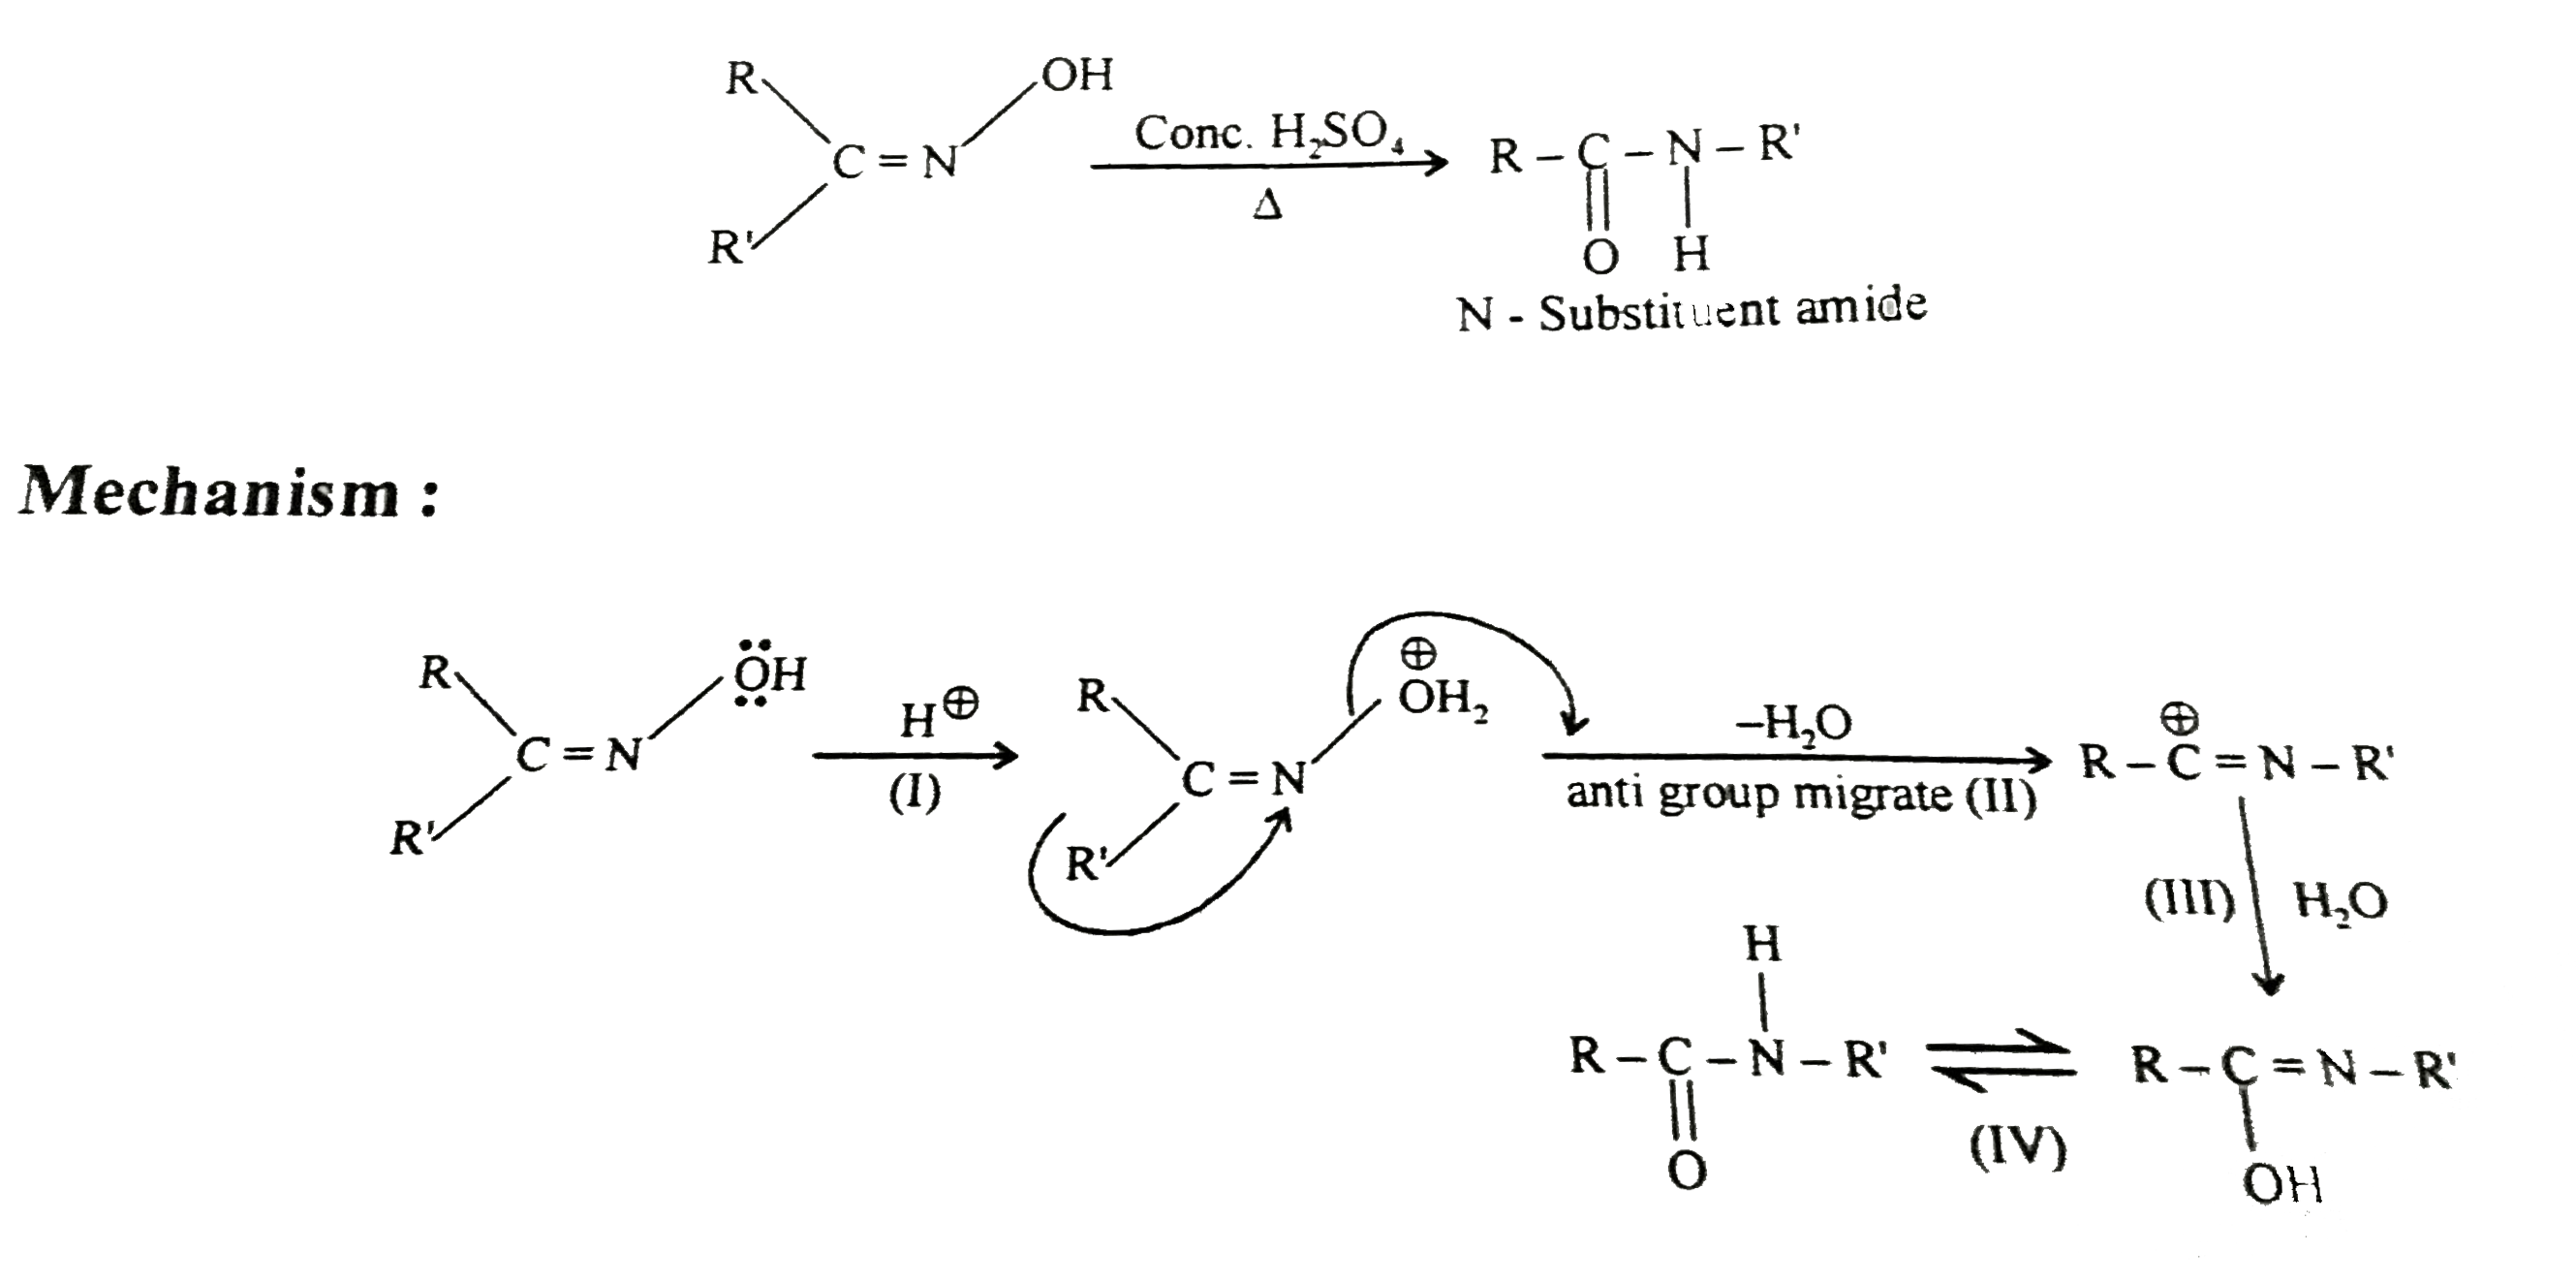 Ketoxine when heated with certain reagents undergoes rearrangement to form amides. This  is known as Beckmann's rearrangement.         Find out slowest step of the reation :